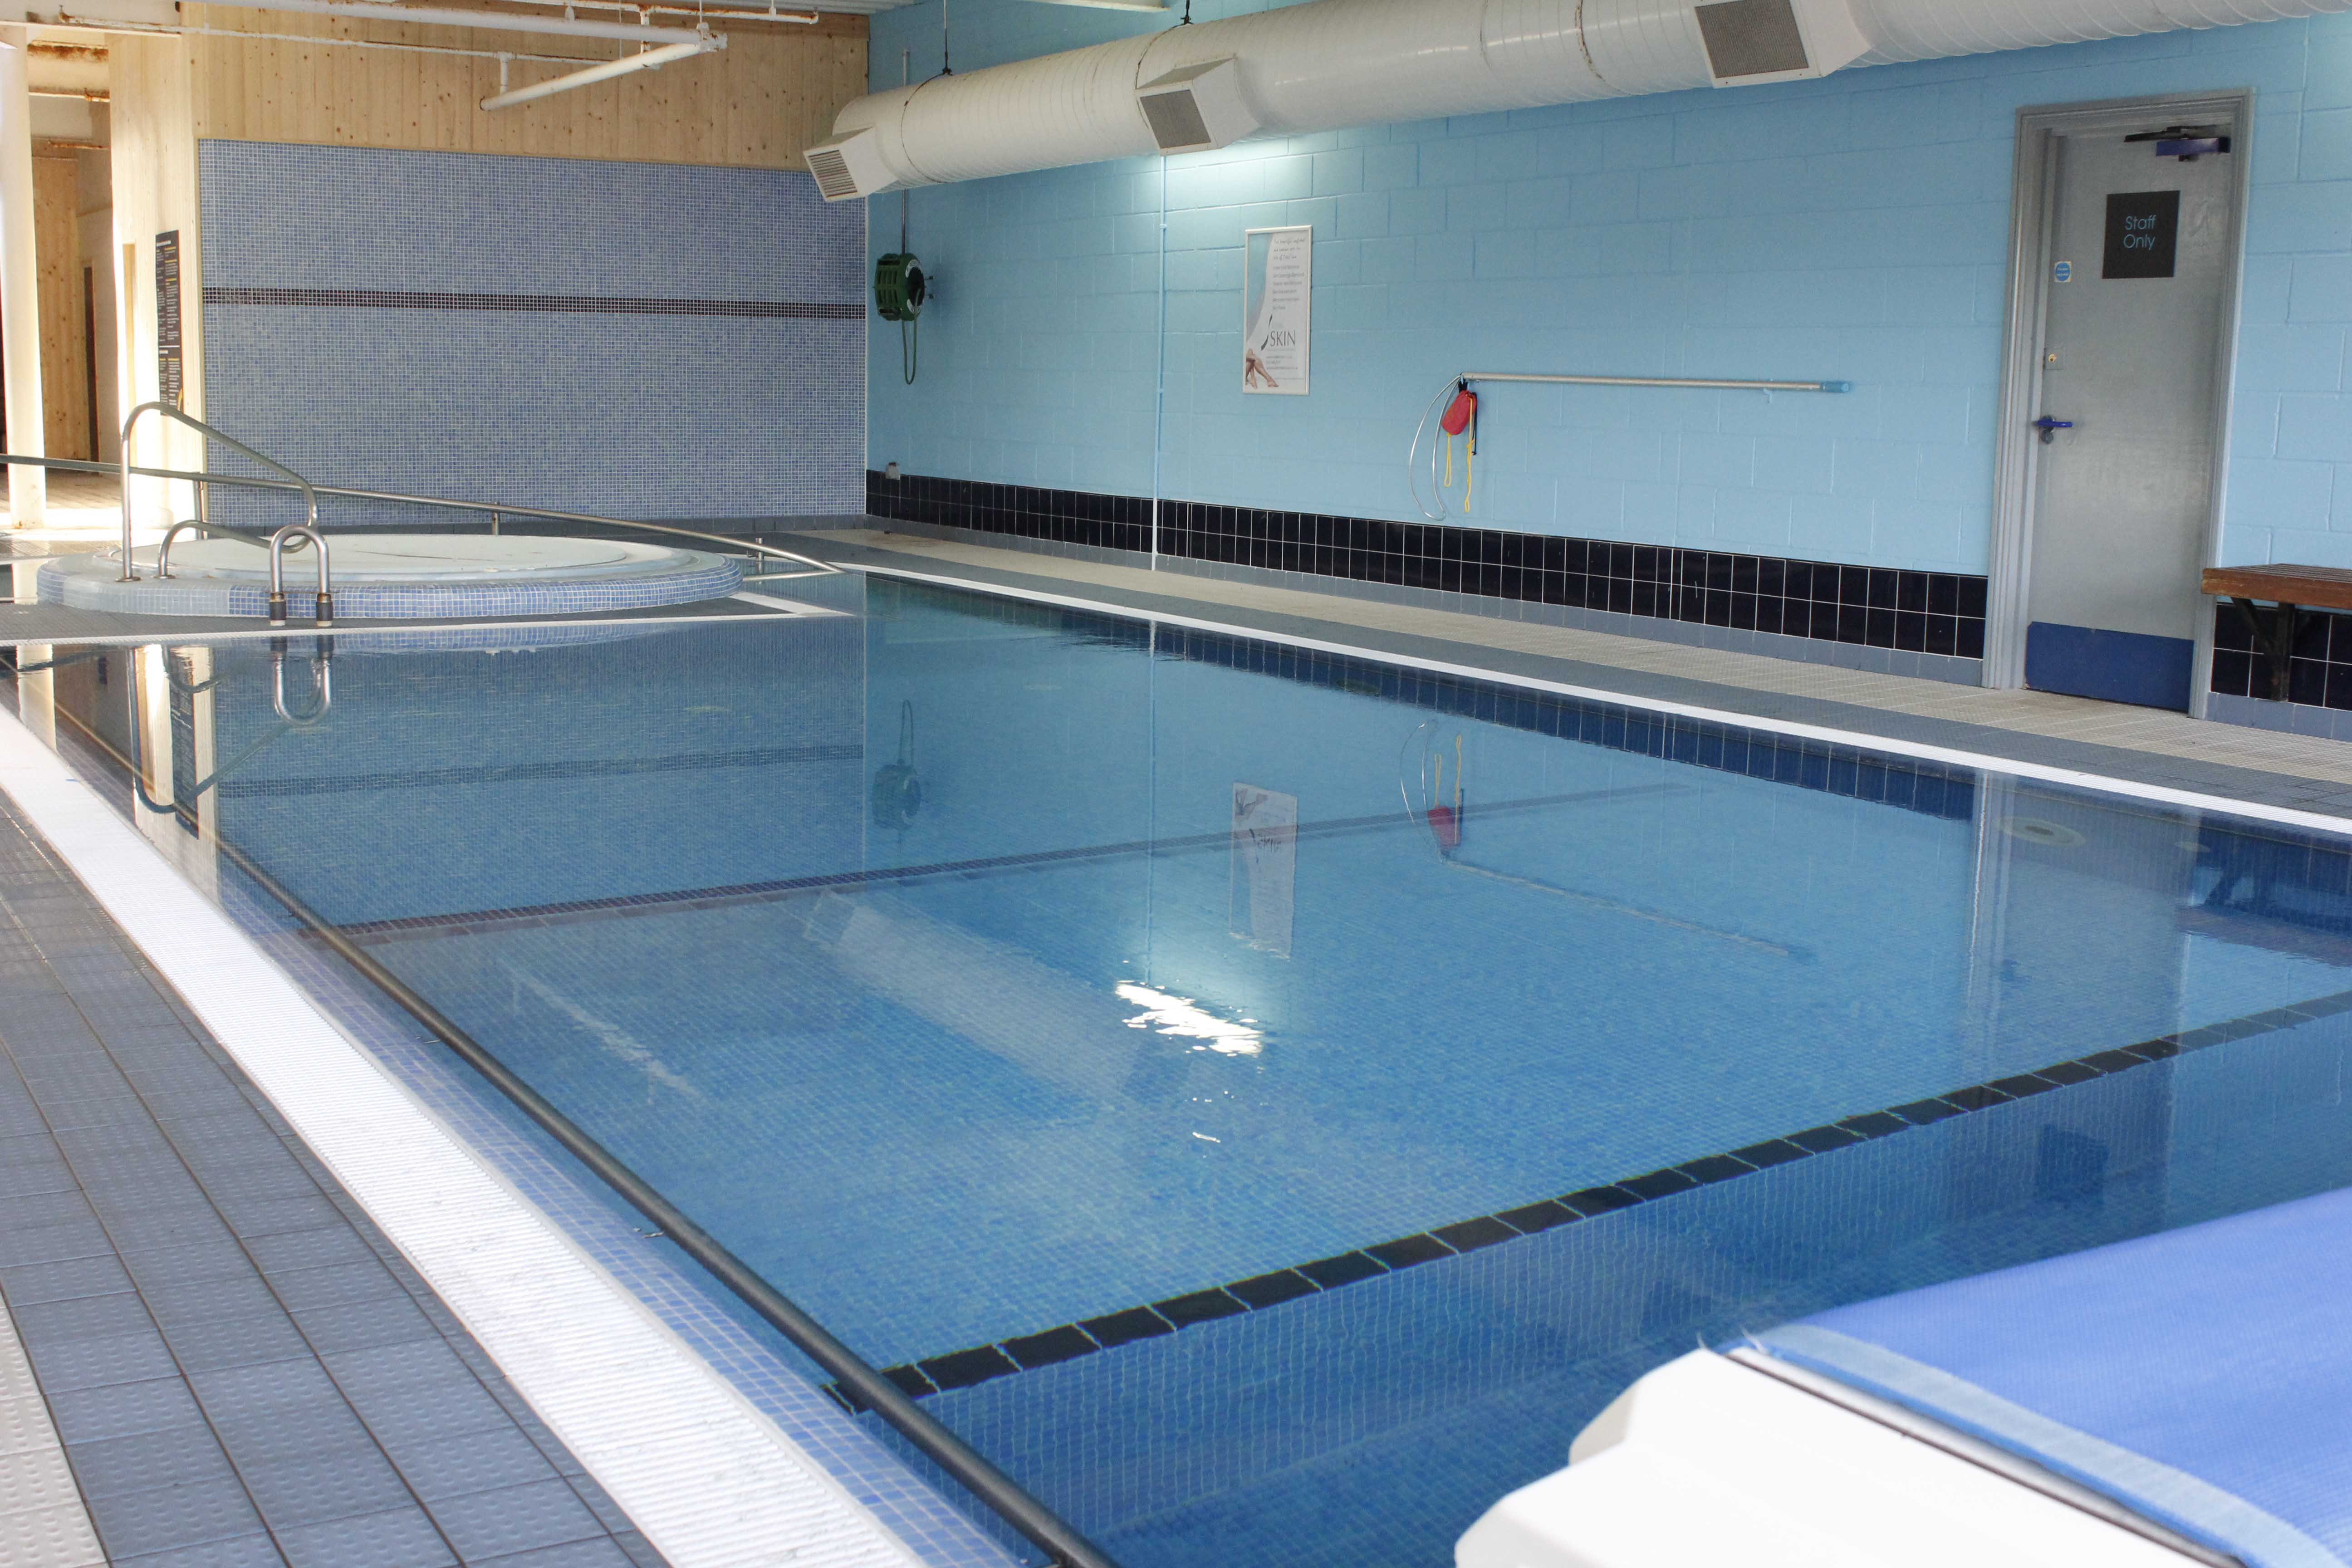 Your physiotherapy sessions will take place in specialised hydrotherapy pools 